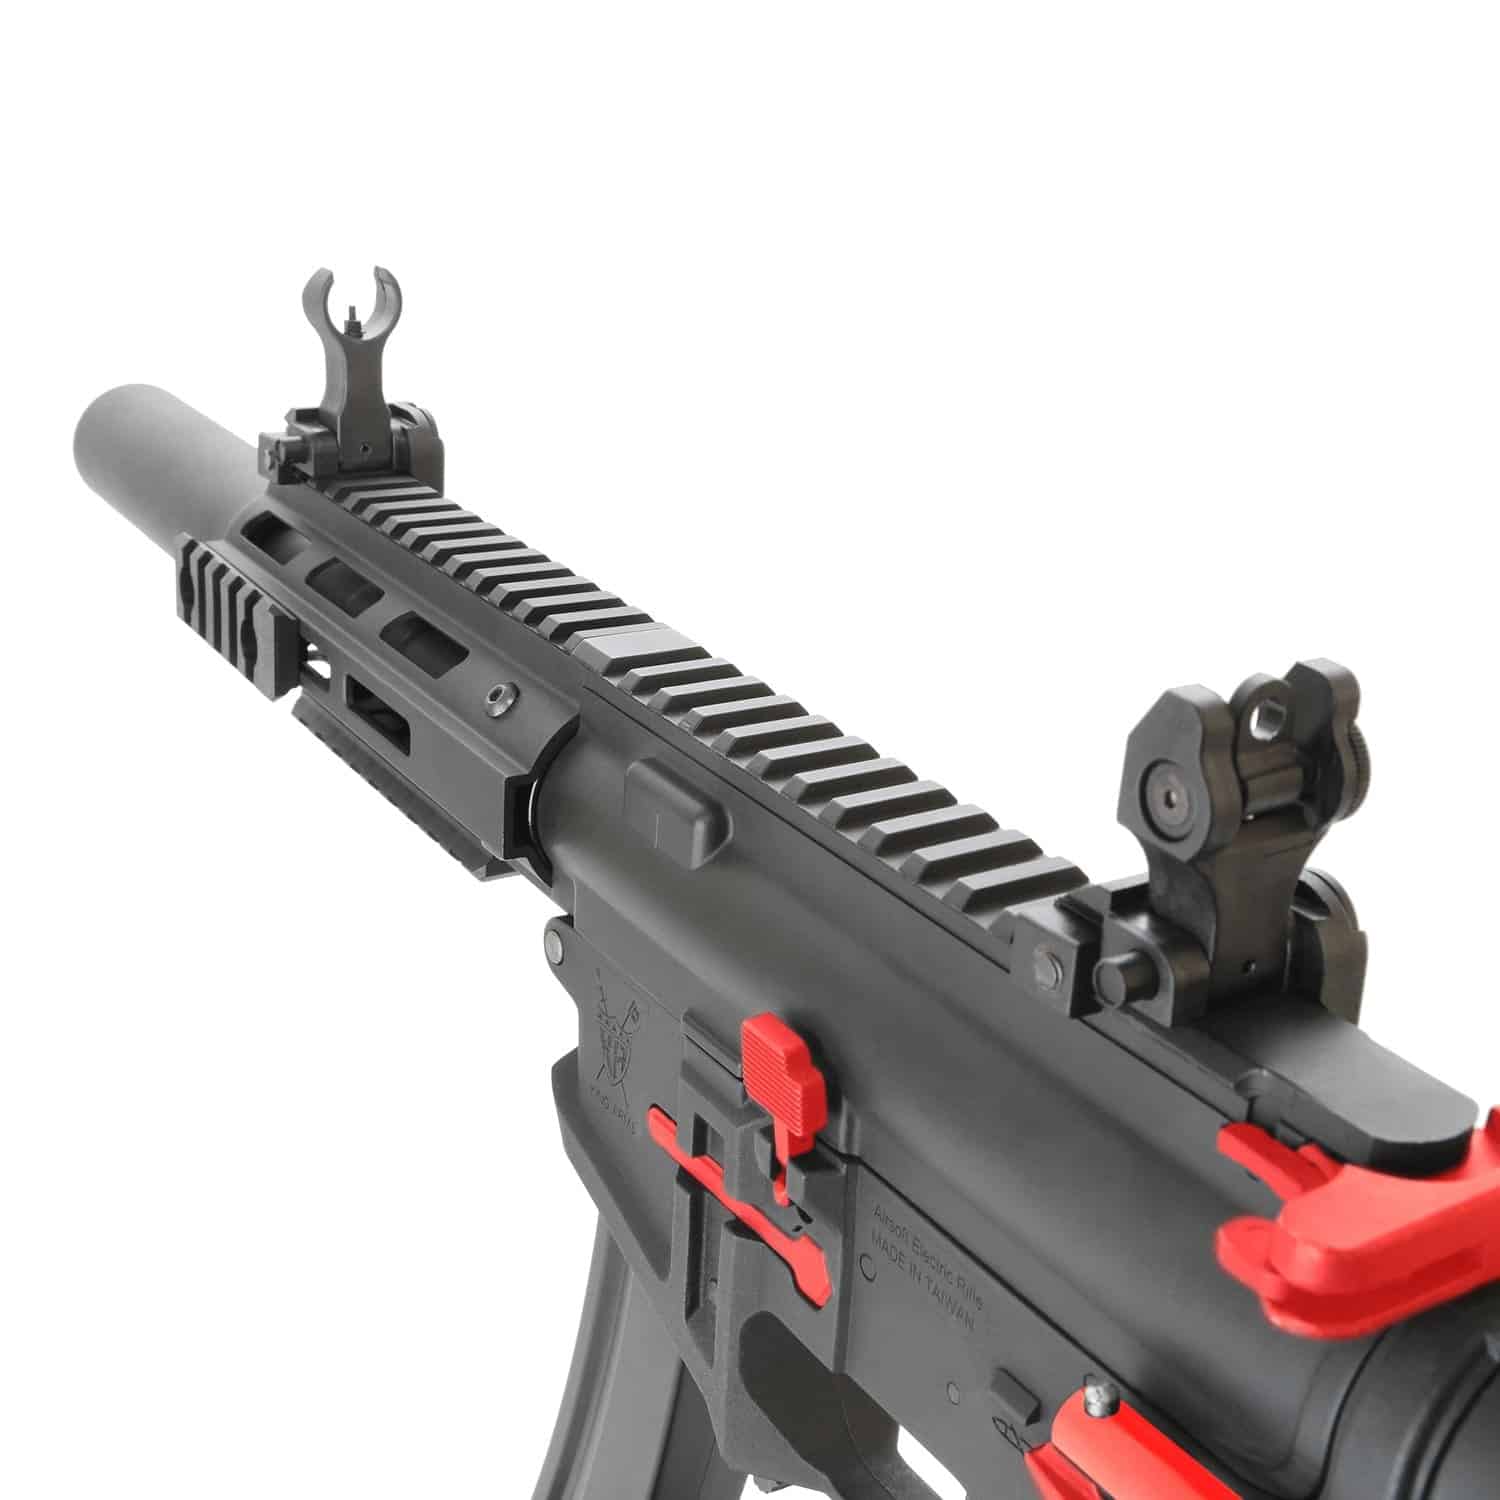 King Arms PDW 9mm SBR SD - Black & Red